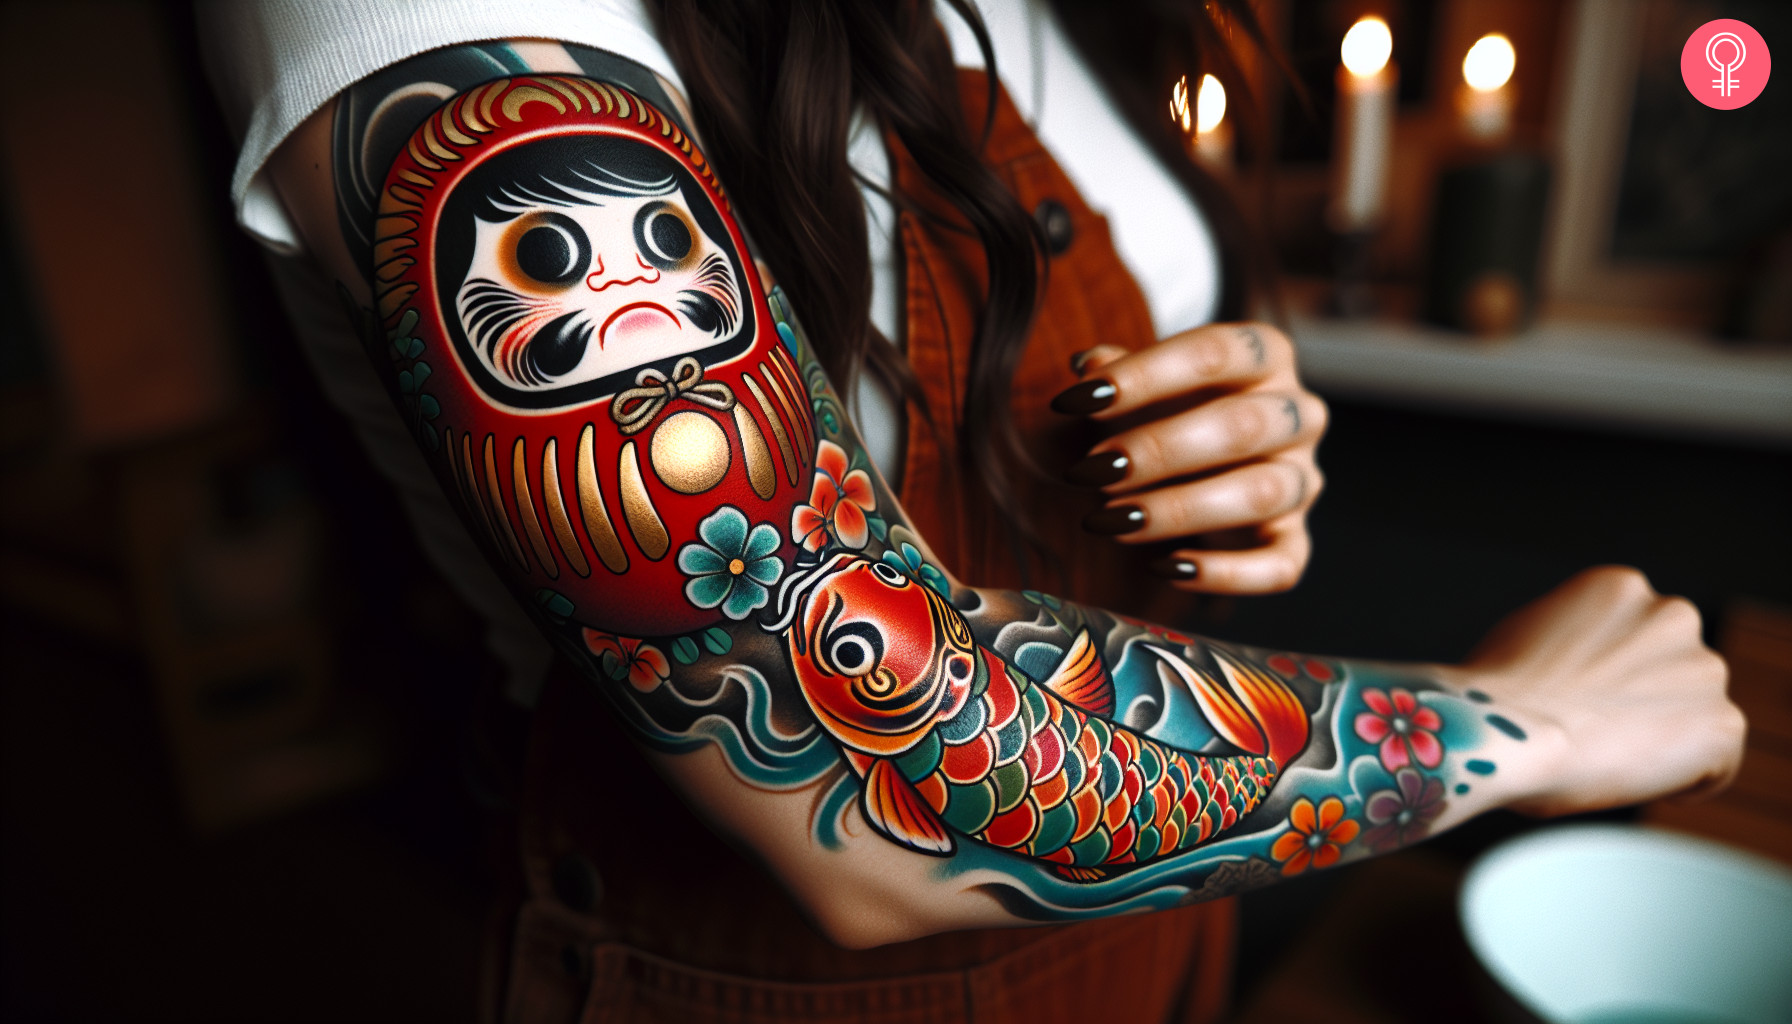 Woman with the tattoo of a Daruma doll and koi fish on her arm